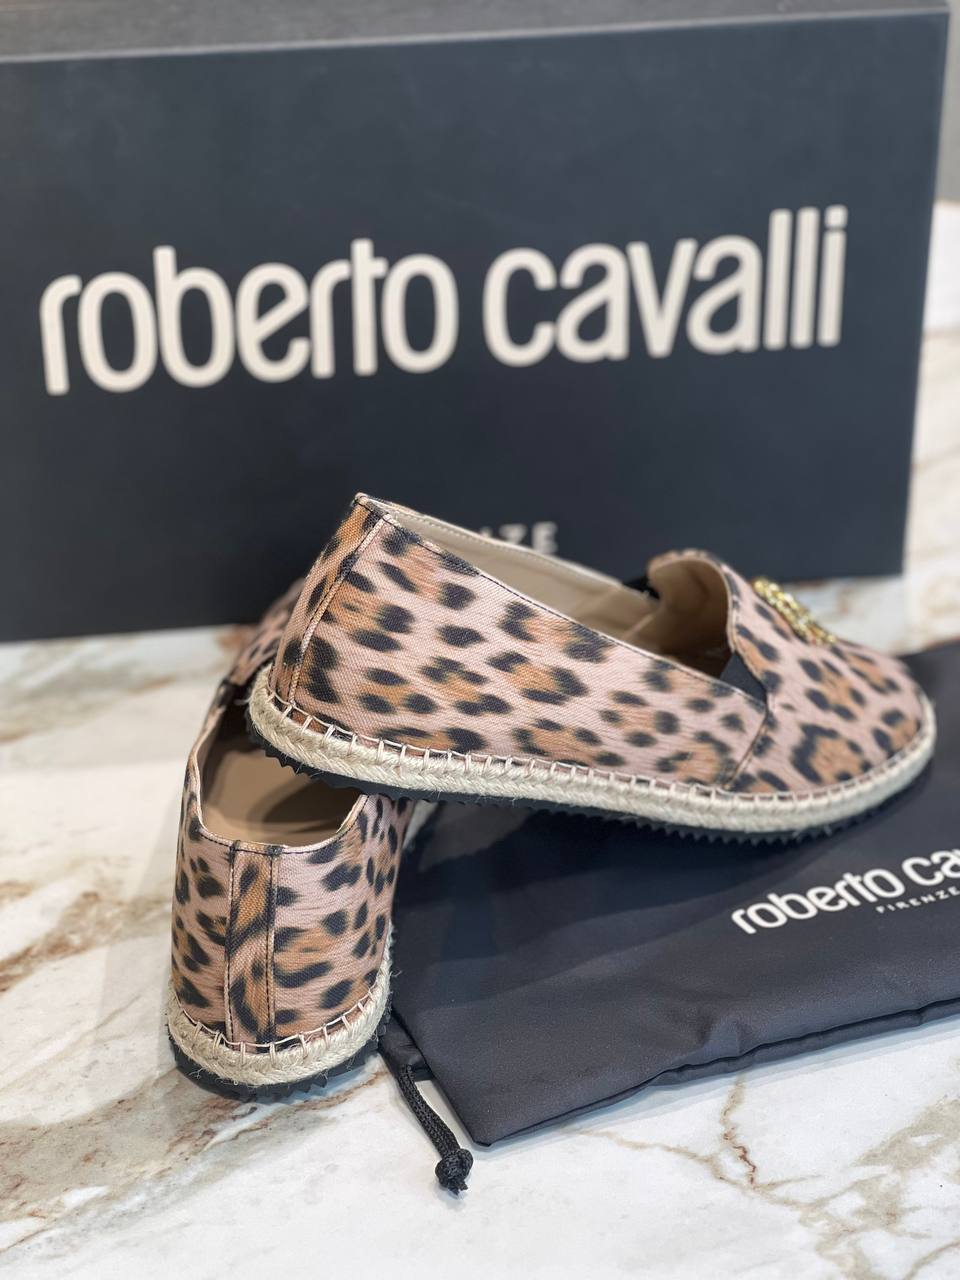 Roberto Cavalli Outlets 5022